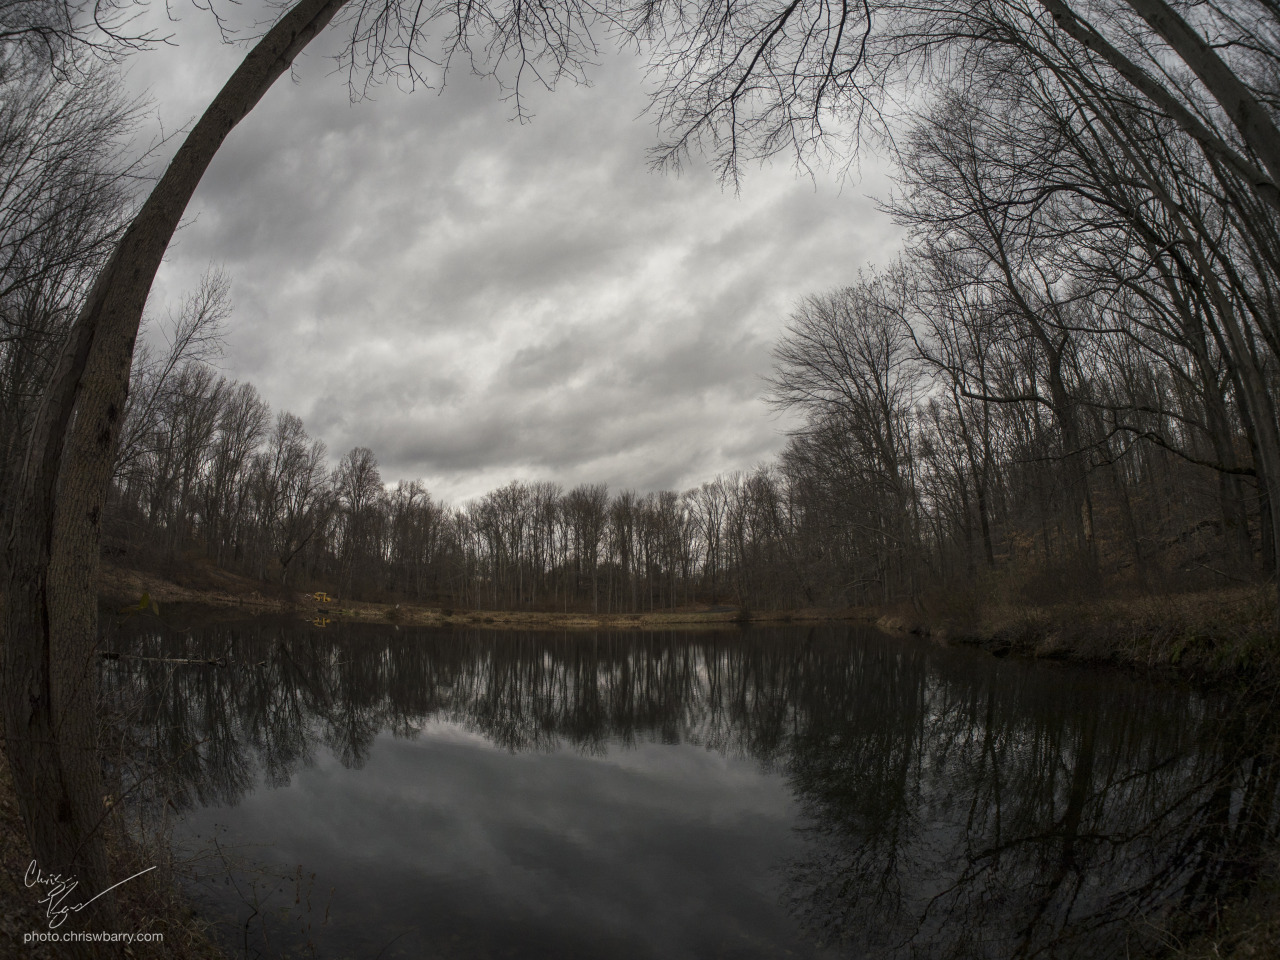 Fisheye is good at clouds